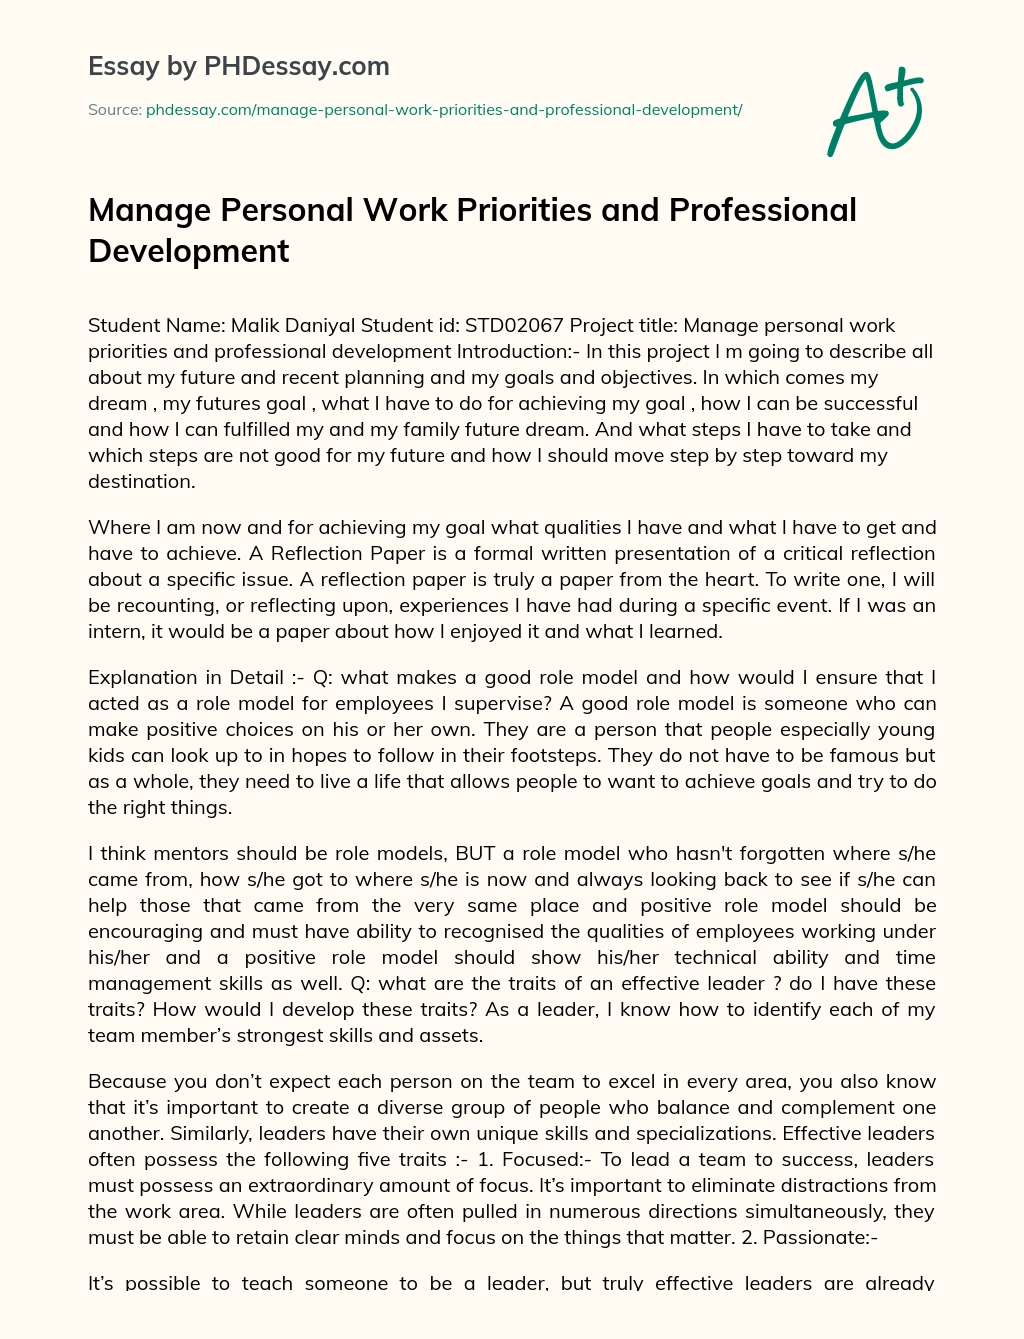 Manage Personal Work Priorities and Professional Development essay